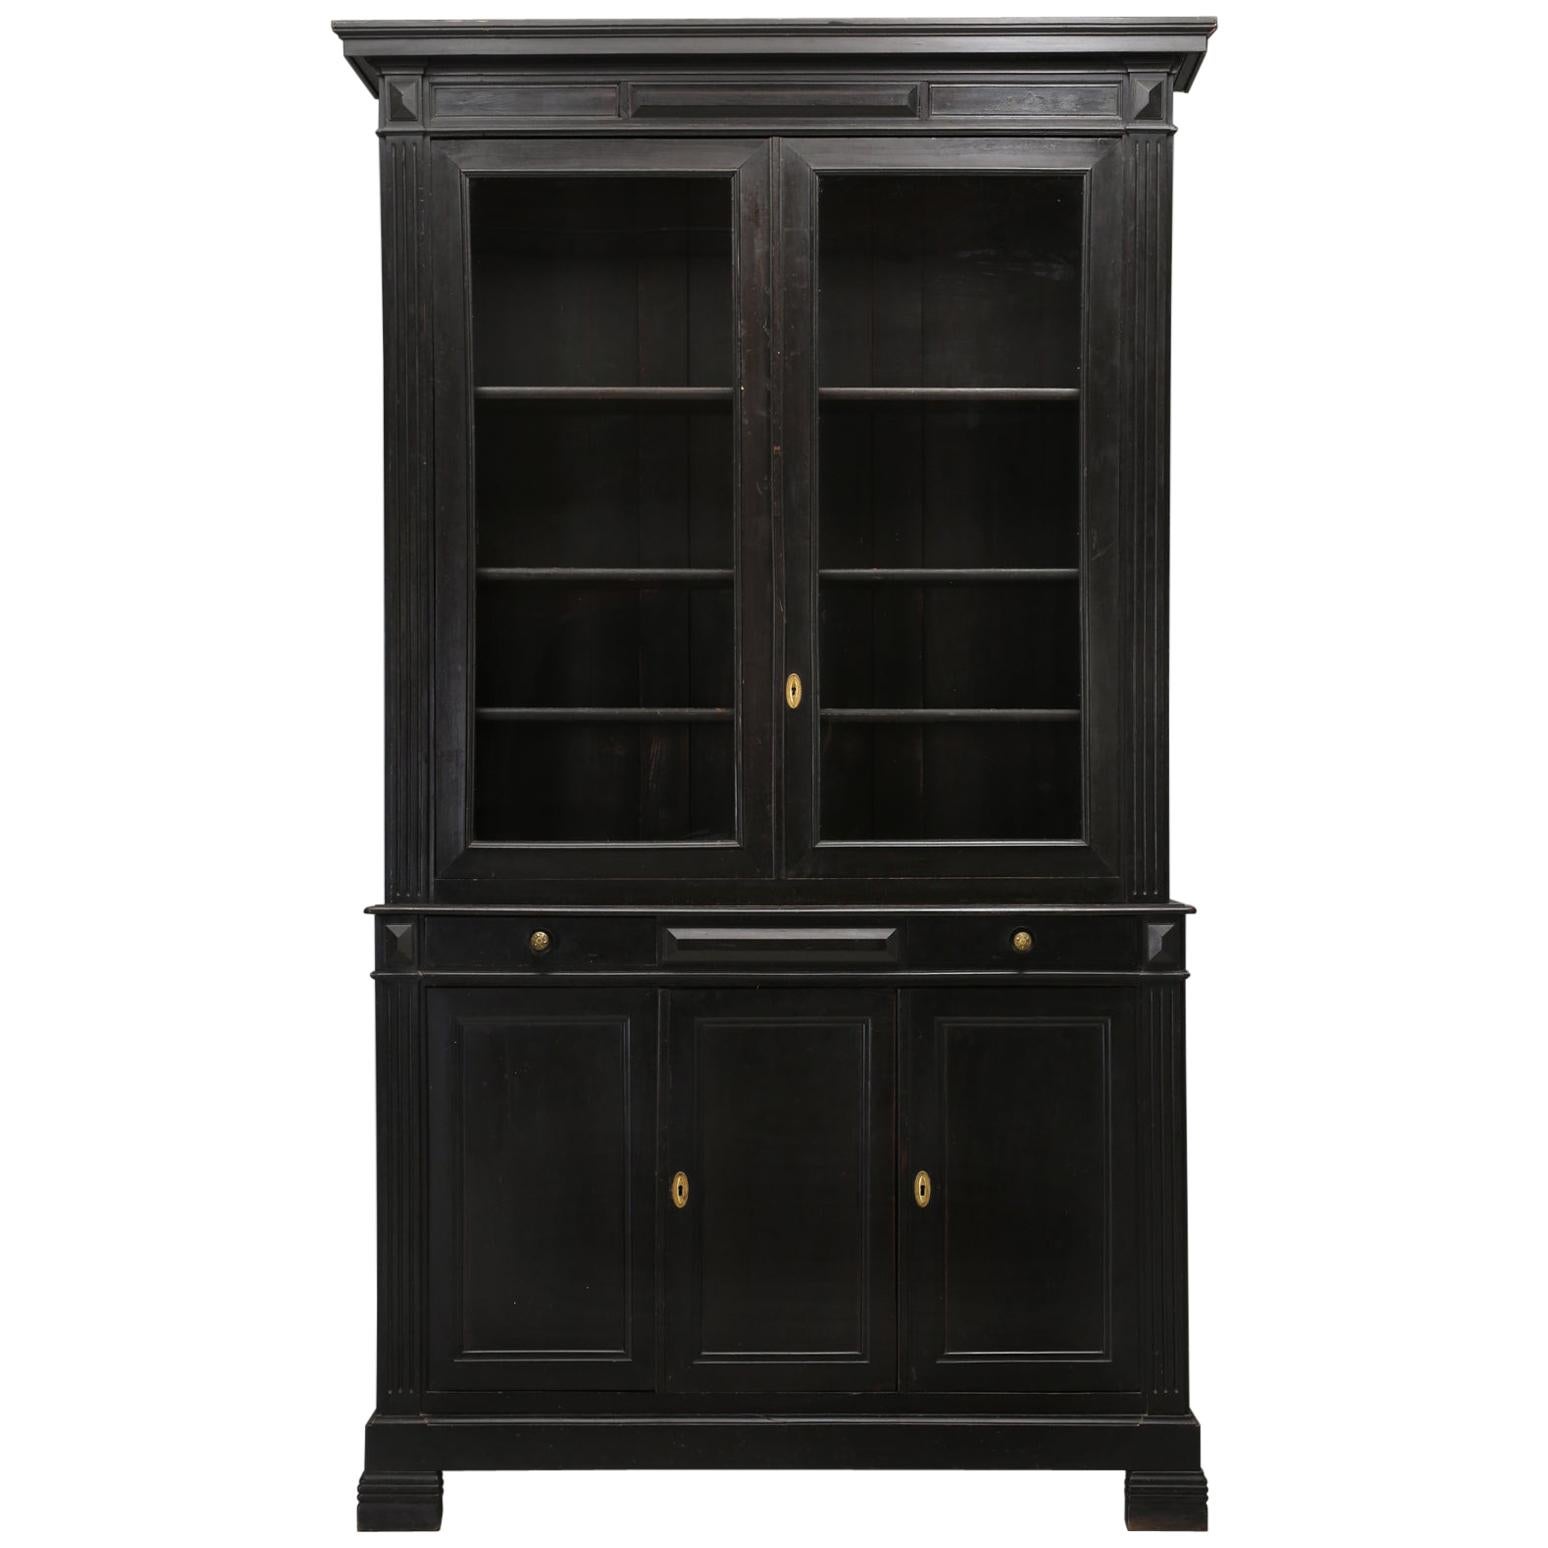 Antique French Ebonized Bookcase that is 100% Original, Including the Finish